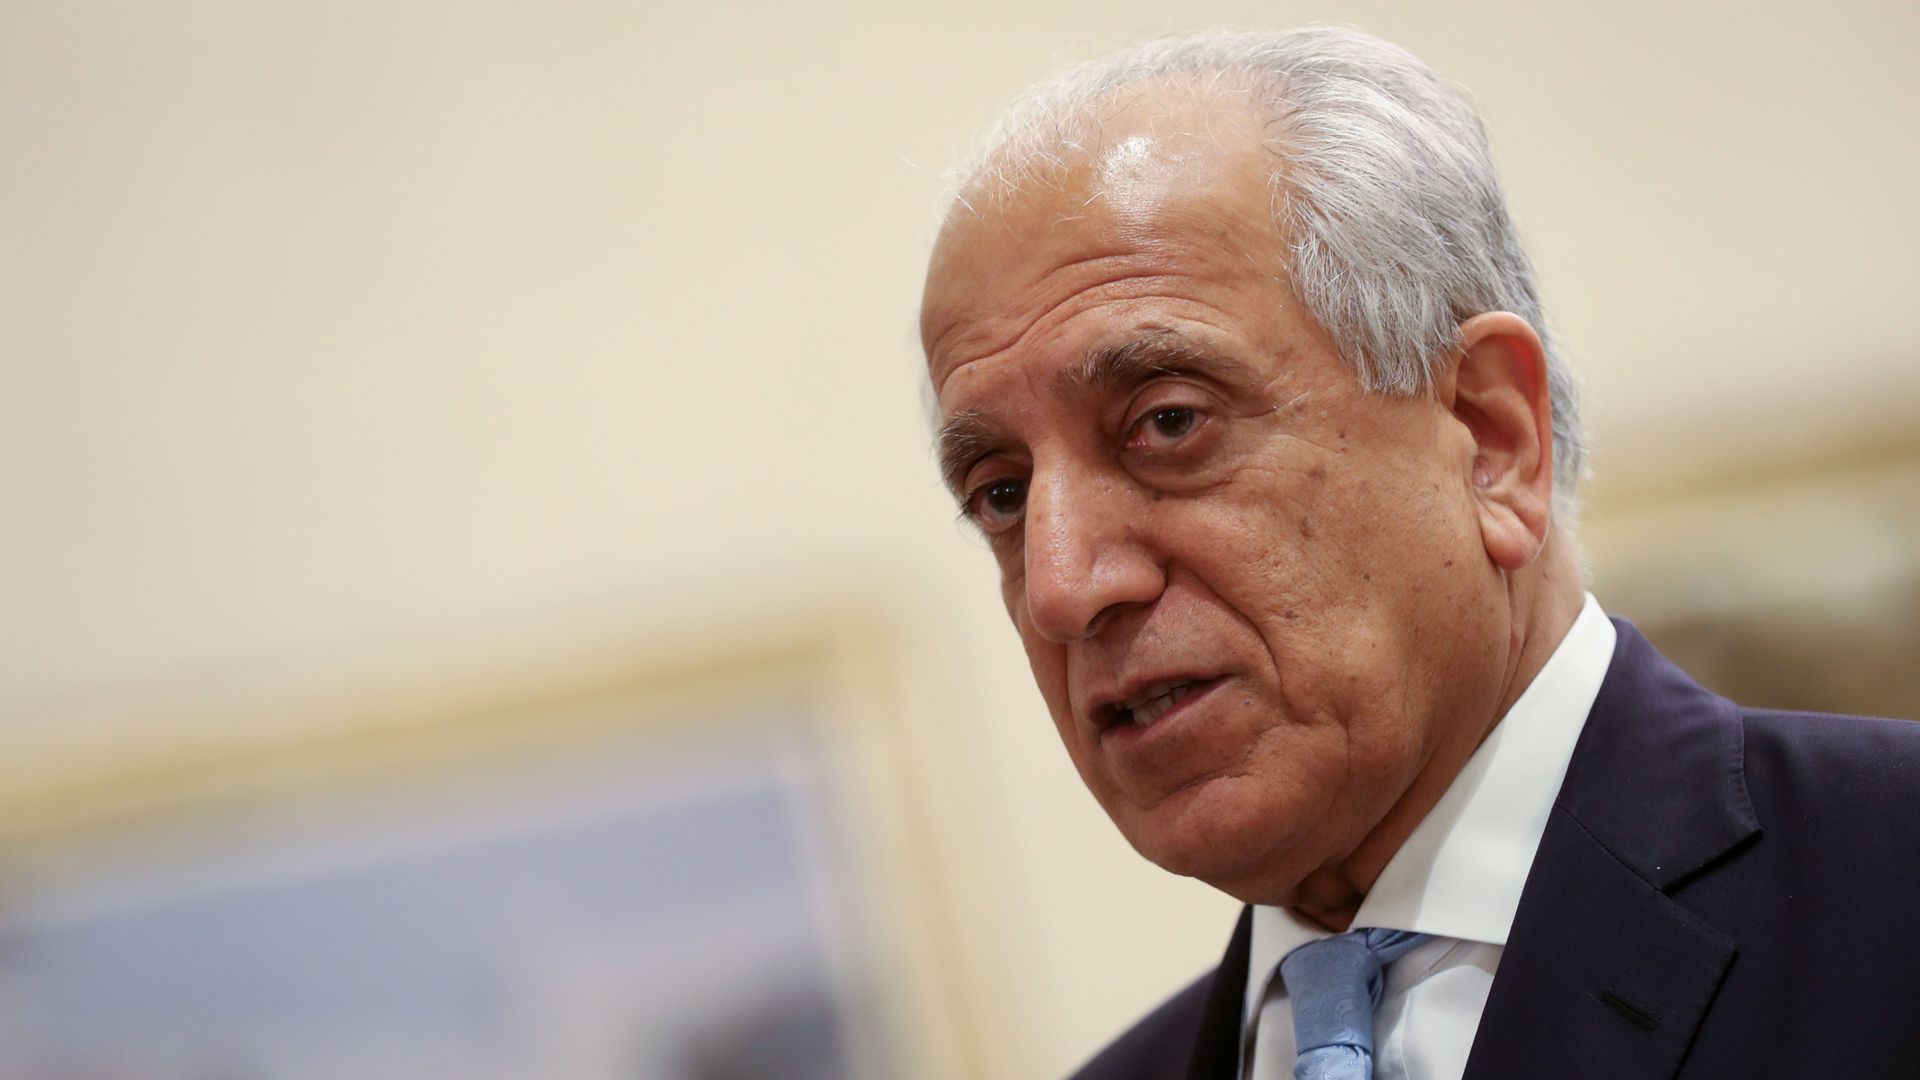 In this image, Khalilzad stands in a suit and tie